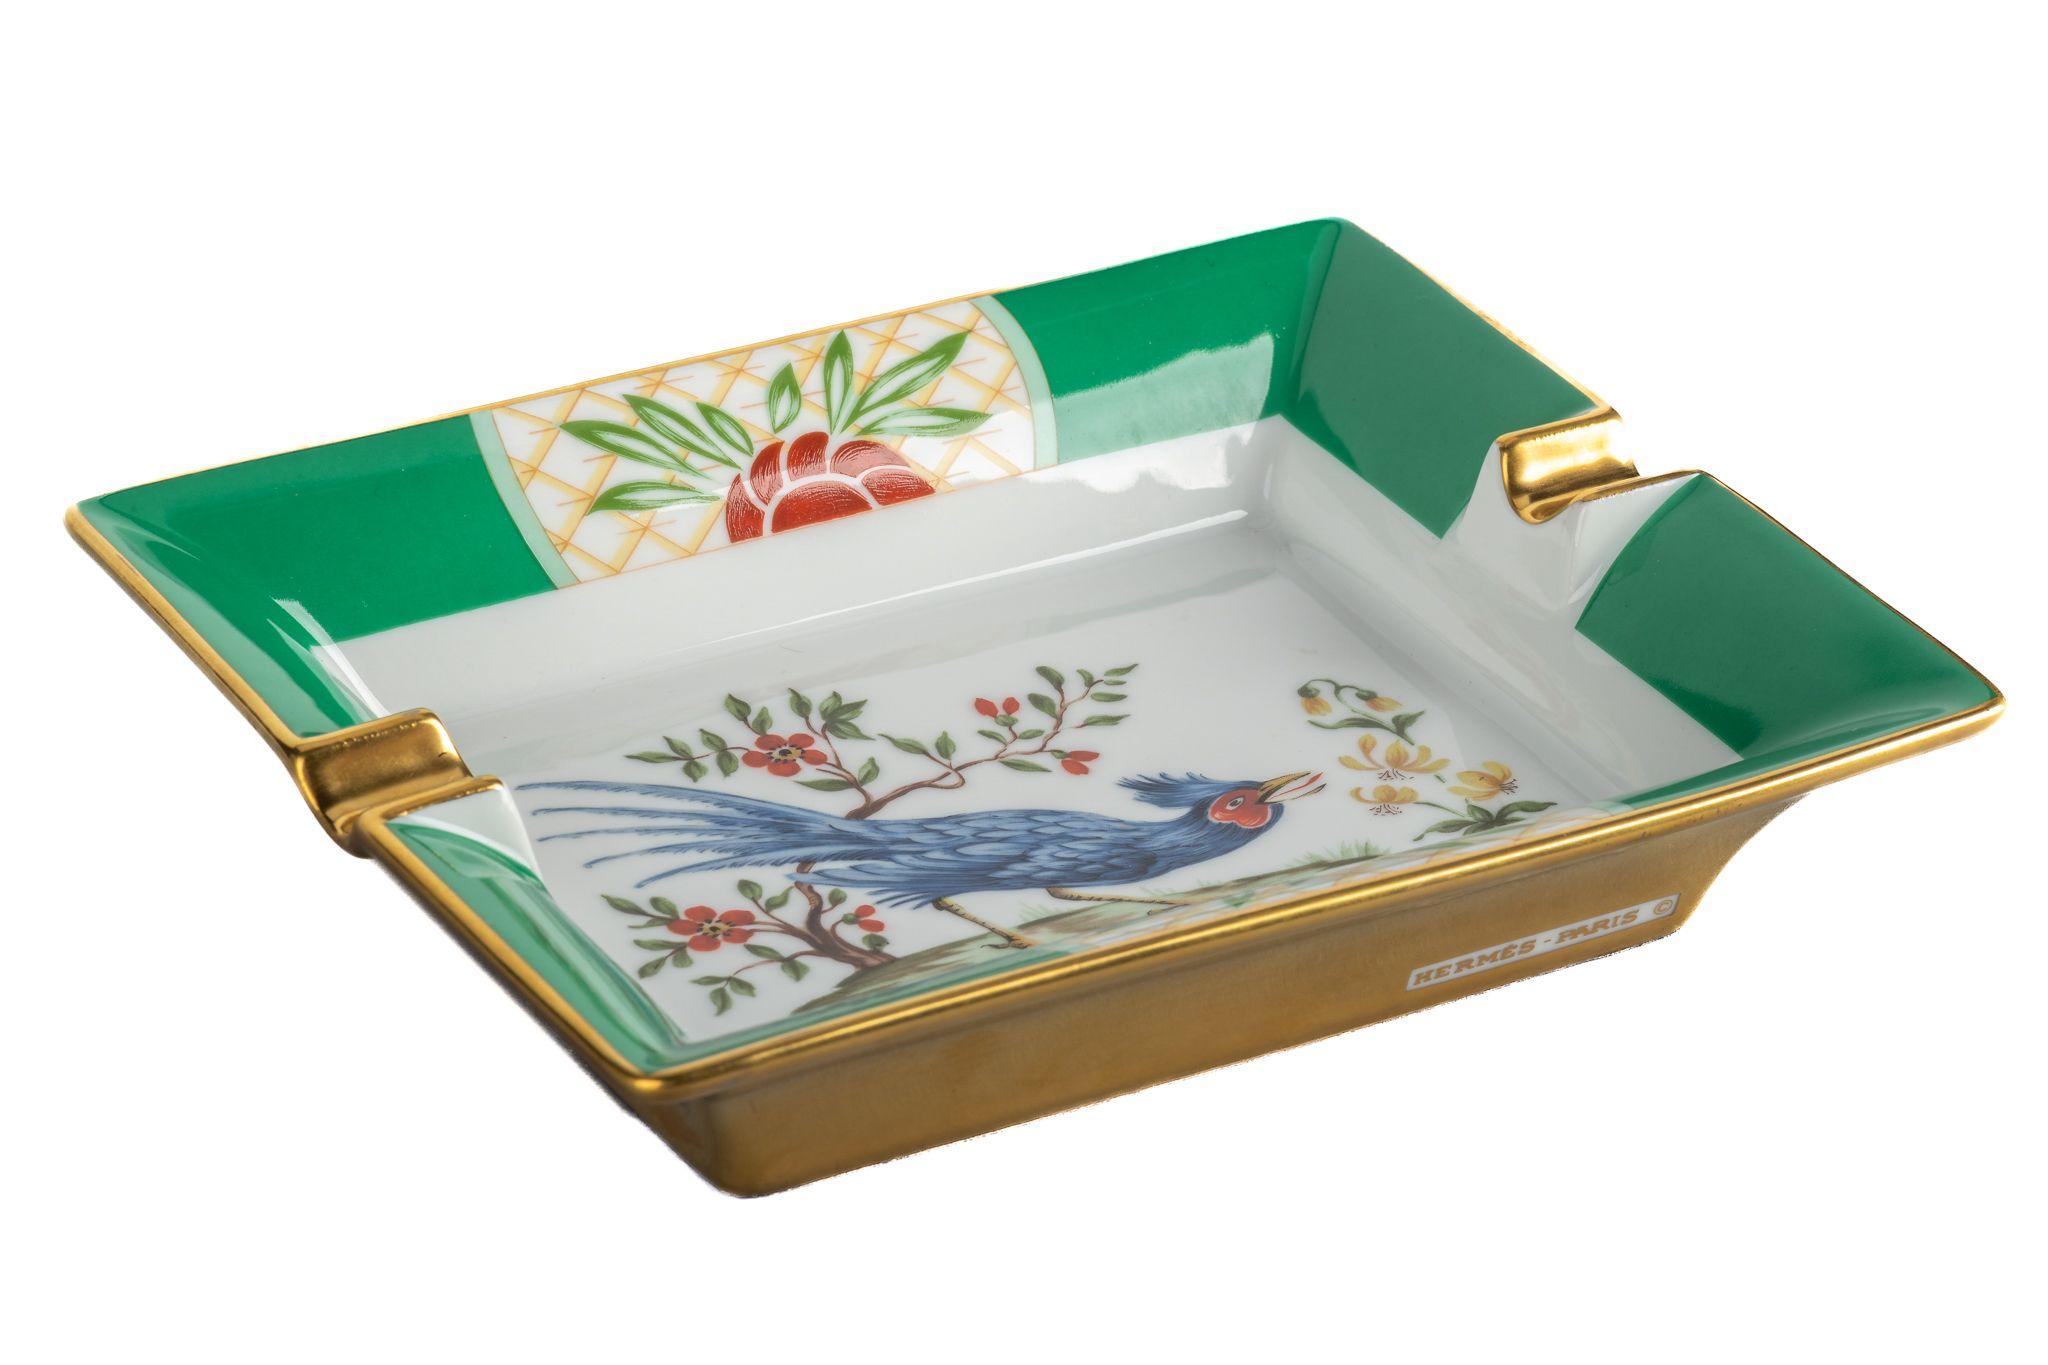 Hermes signature ashtray with green bird design in green  and gold. Suede stamped bottom. Minor wear on it. Made in France.